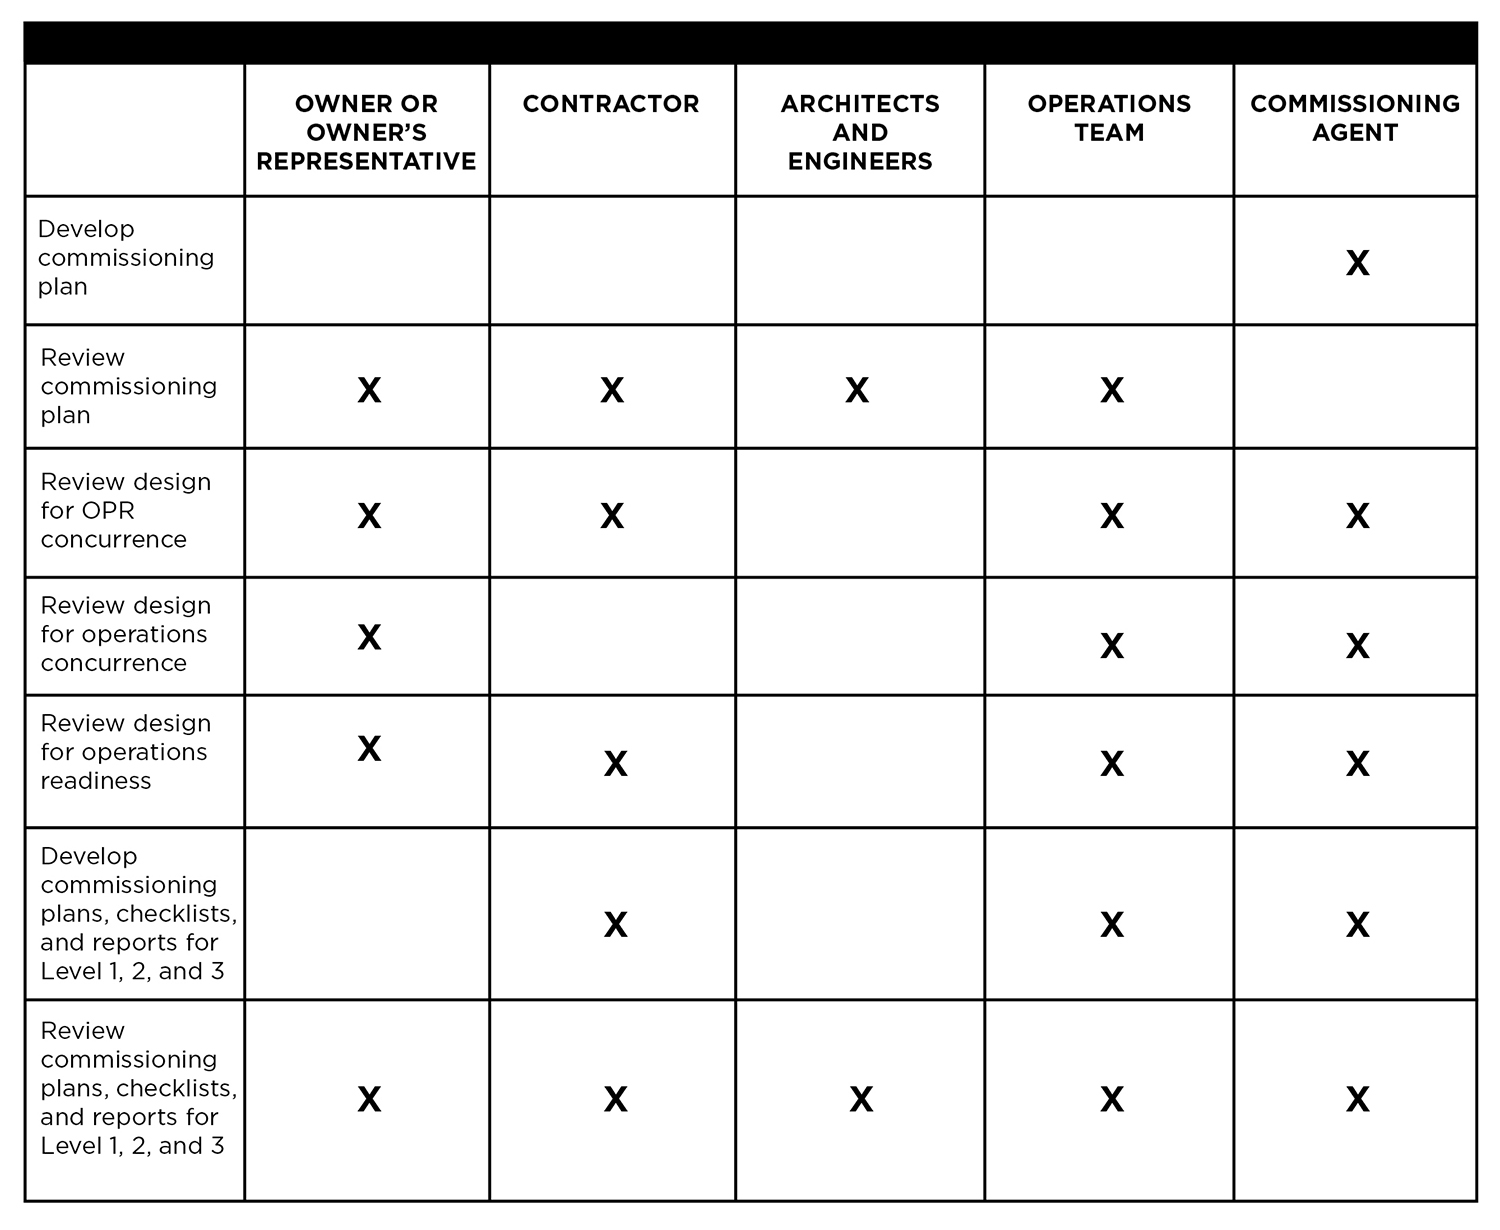 Table 3. Design and Pre-Construction Phase tasks